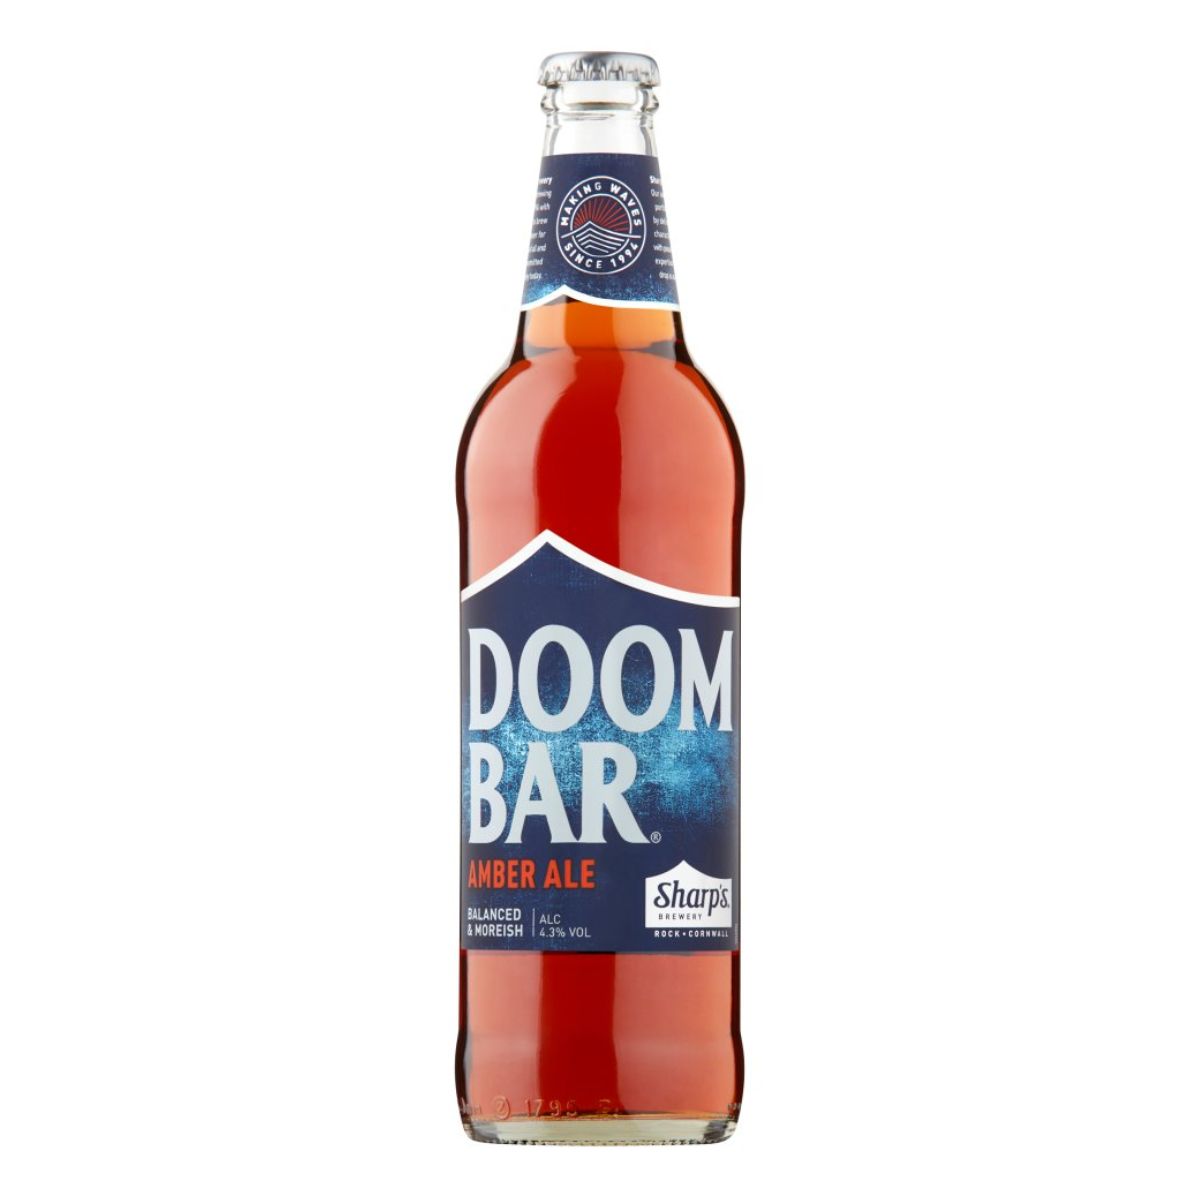 A bottle of Doom Bar - Amber Ale (4.3% ABV) - 500ml on a white background.